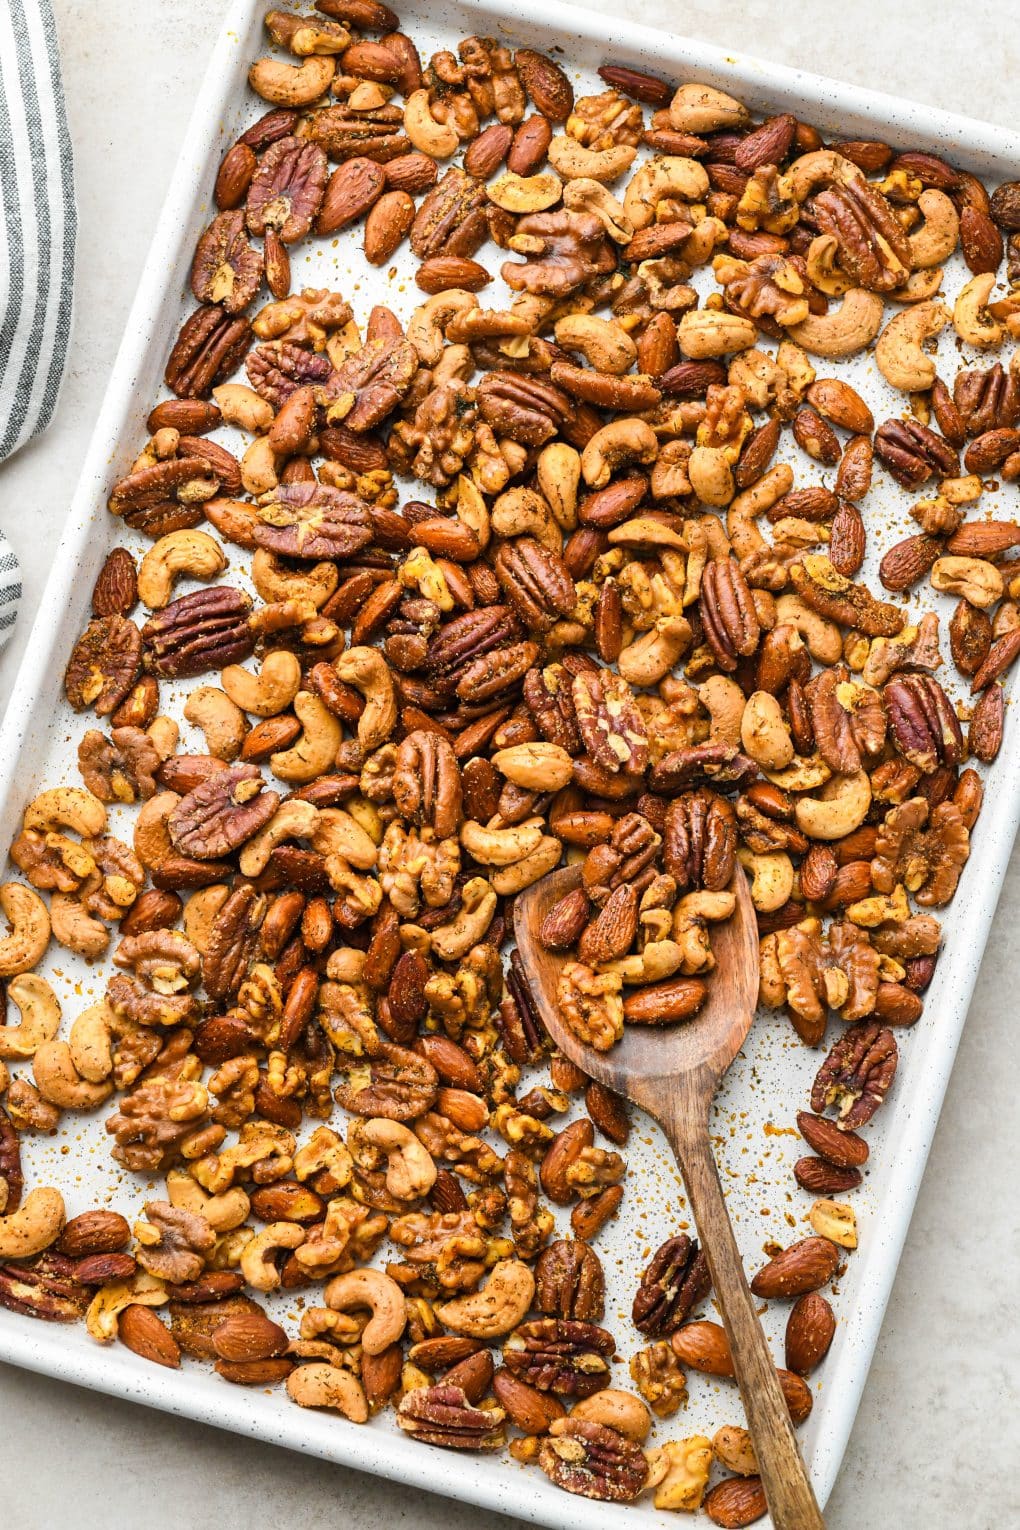 A white speckled baking sheet filled with roasted spiced nuts.